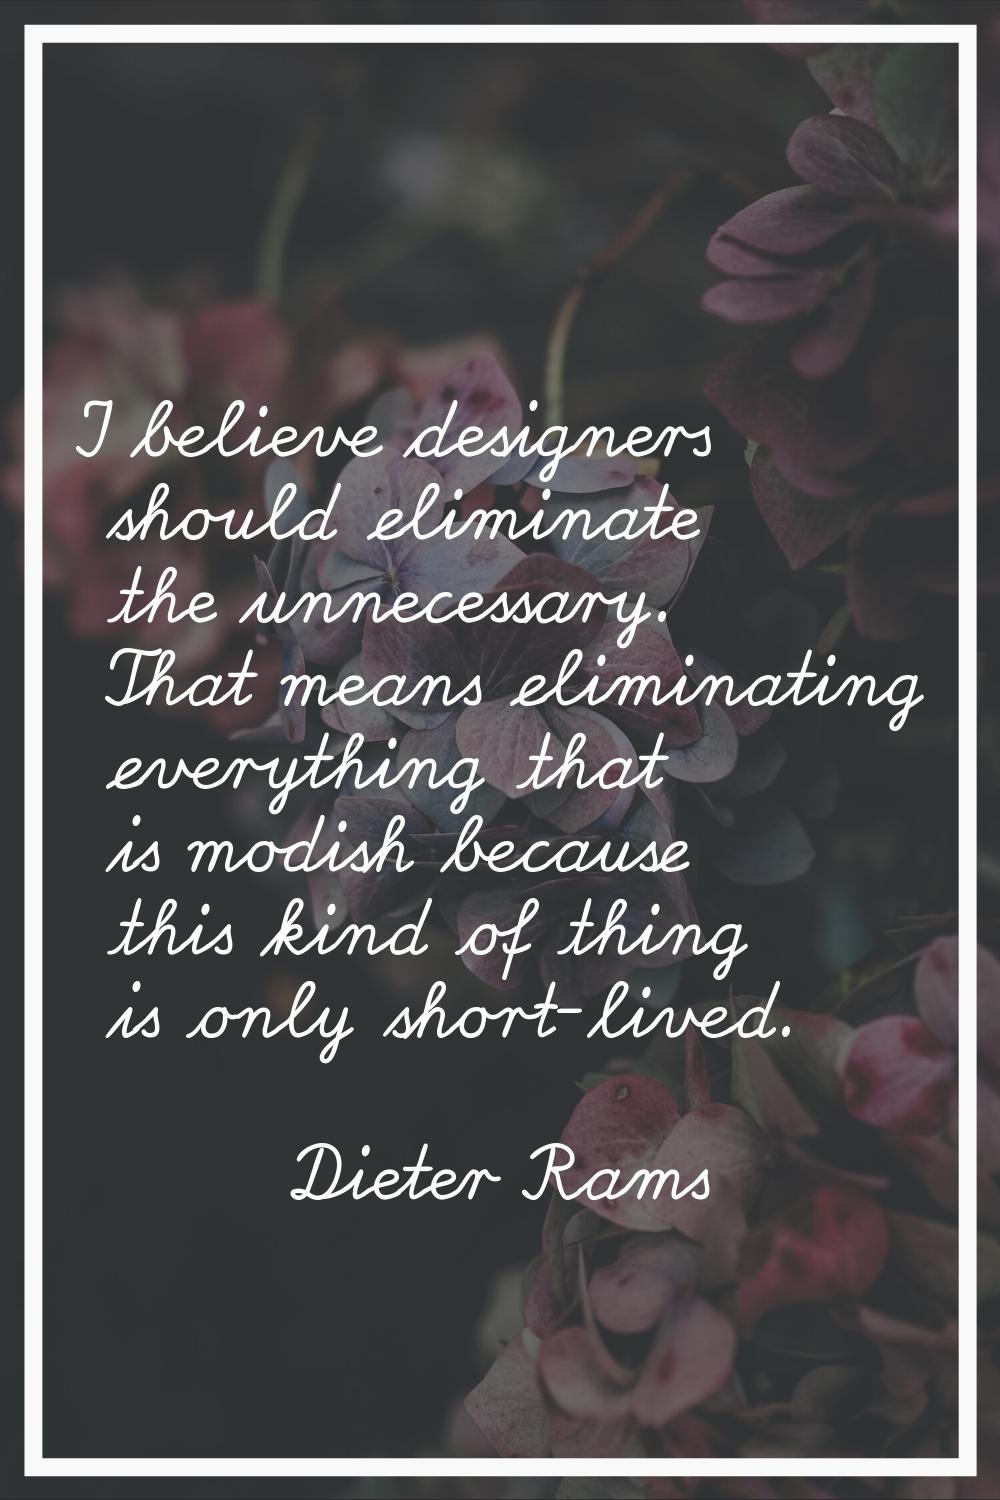 I believe designers should eliminate the unnecessary. That means eliminating everything that is mod